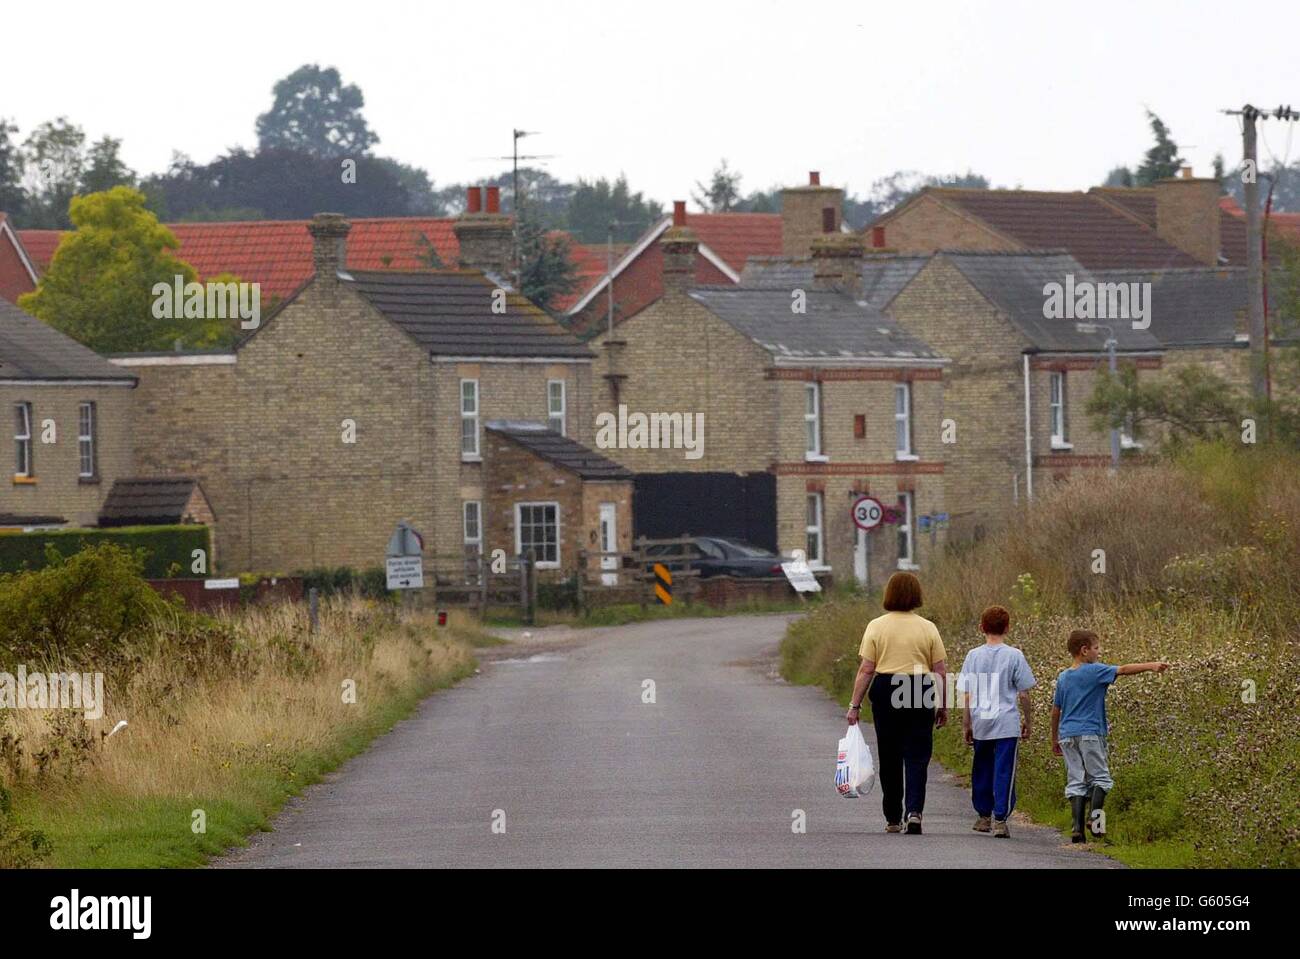 A woman walks along a country road into Soham, Cambridgeshire as the search for the missing 10-year-old girls, Holly Wells and Jessica Chapman continues. The two girls went missing on Sunday August 4 2002. *... Police have been focusing on sightings of the pair around Soham, where the girls disappeared. Officers are continuing house-to-house inquiries and have begun searching outlying areas of the town, including fields, ditches, drains and waterways. Torrential rain has lashed the town in the past 48 hours and officers have admitted they fear vital evidence could be washed away. Stock Photo